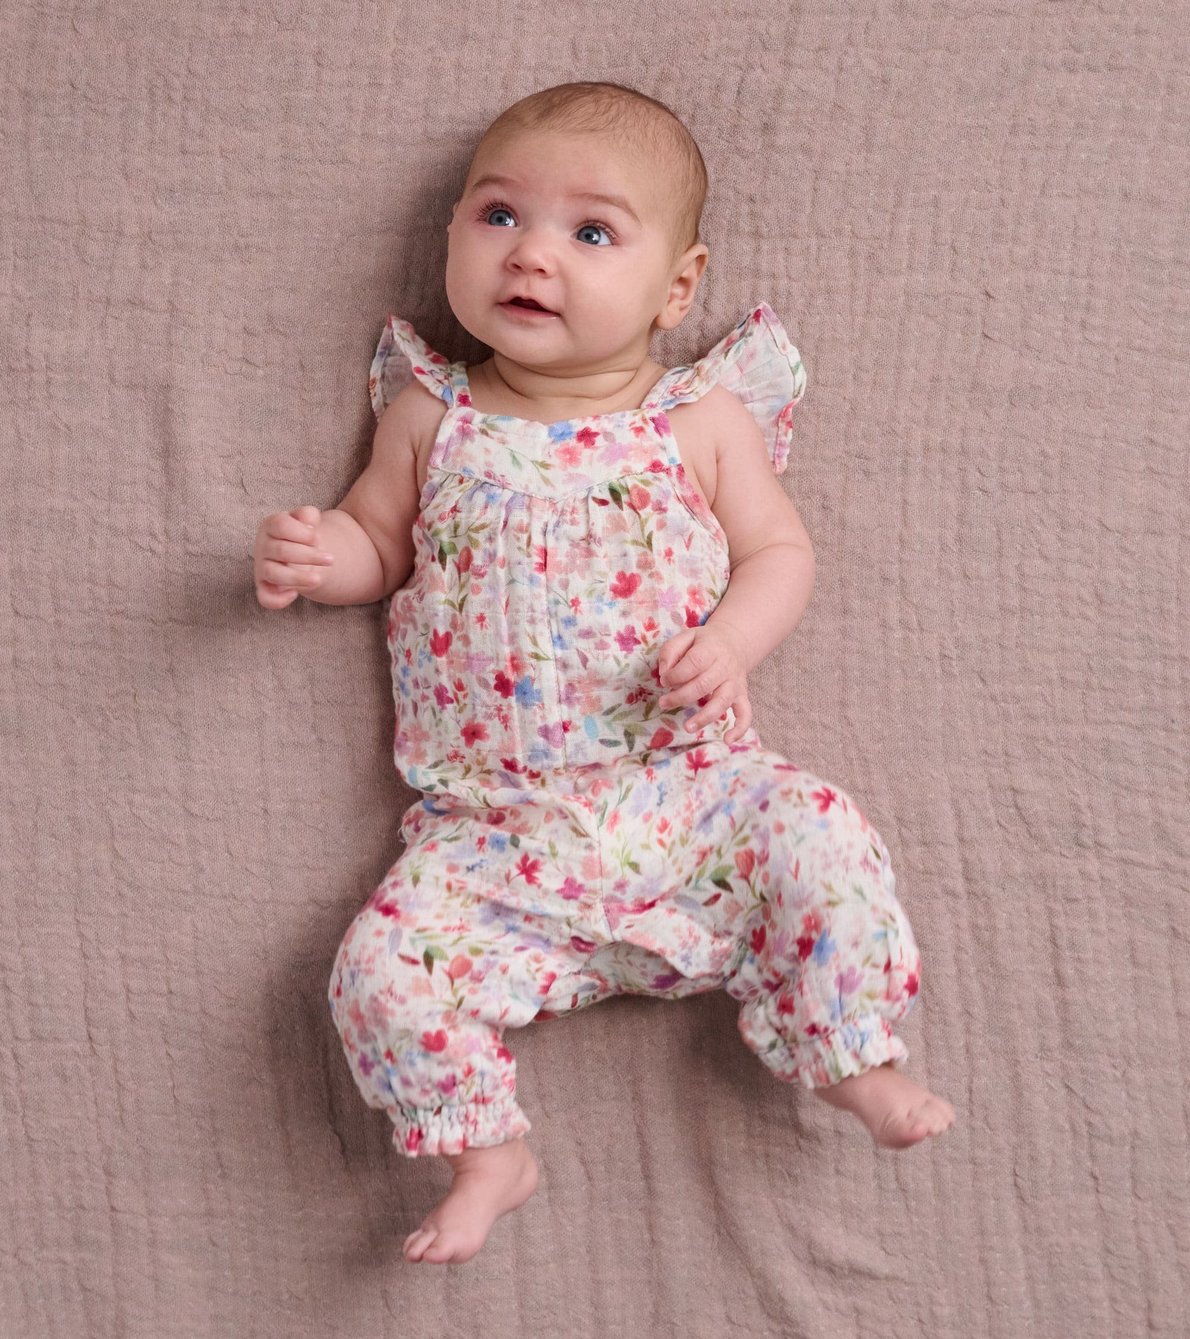 View larger image of Watercolour Flowers Baby Romper